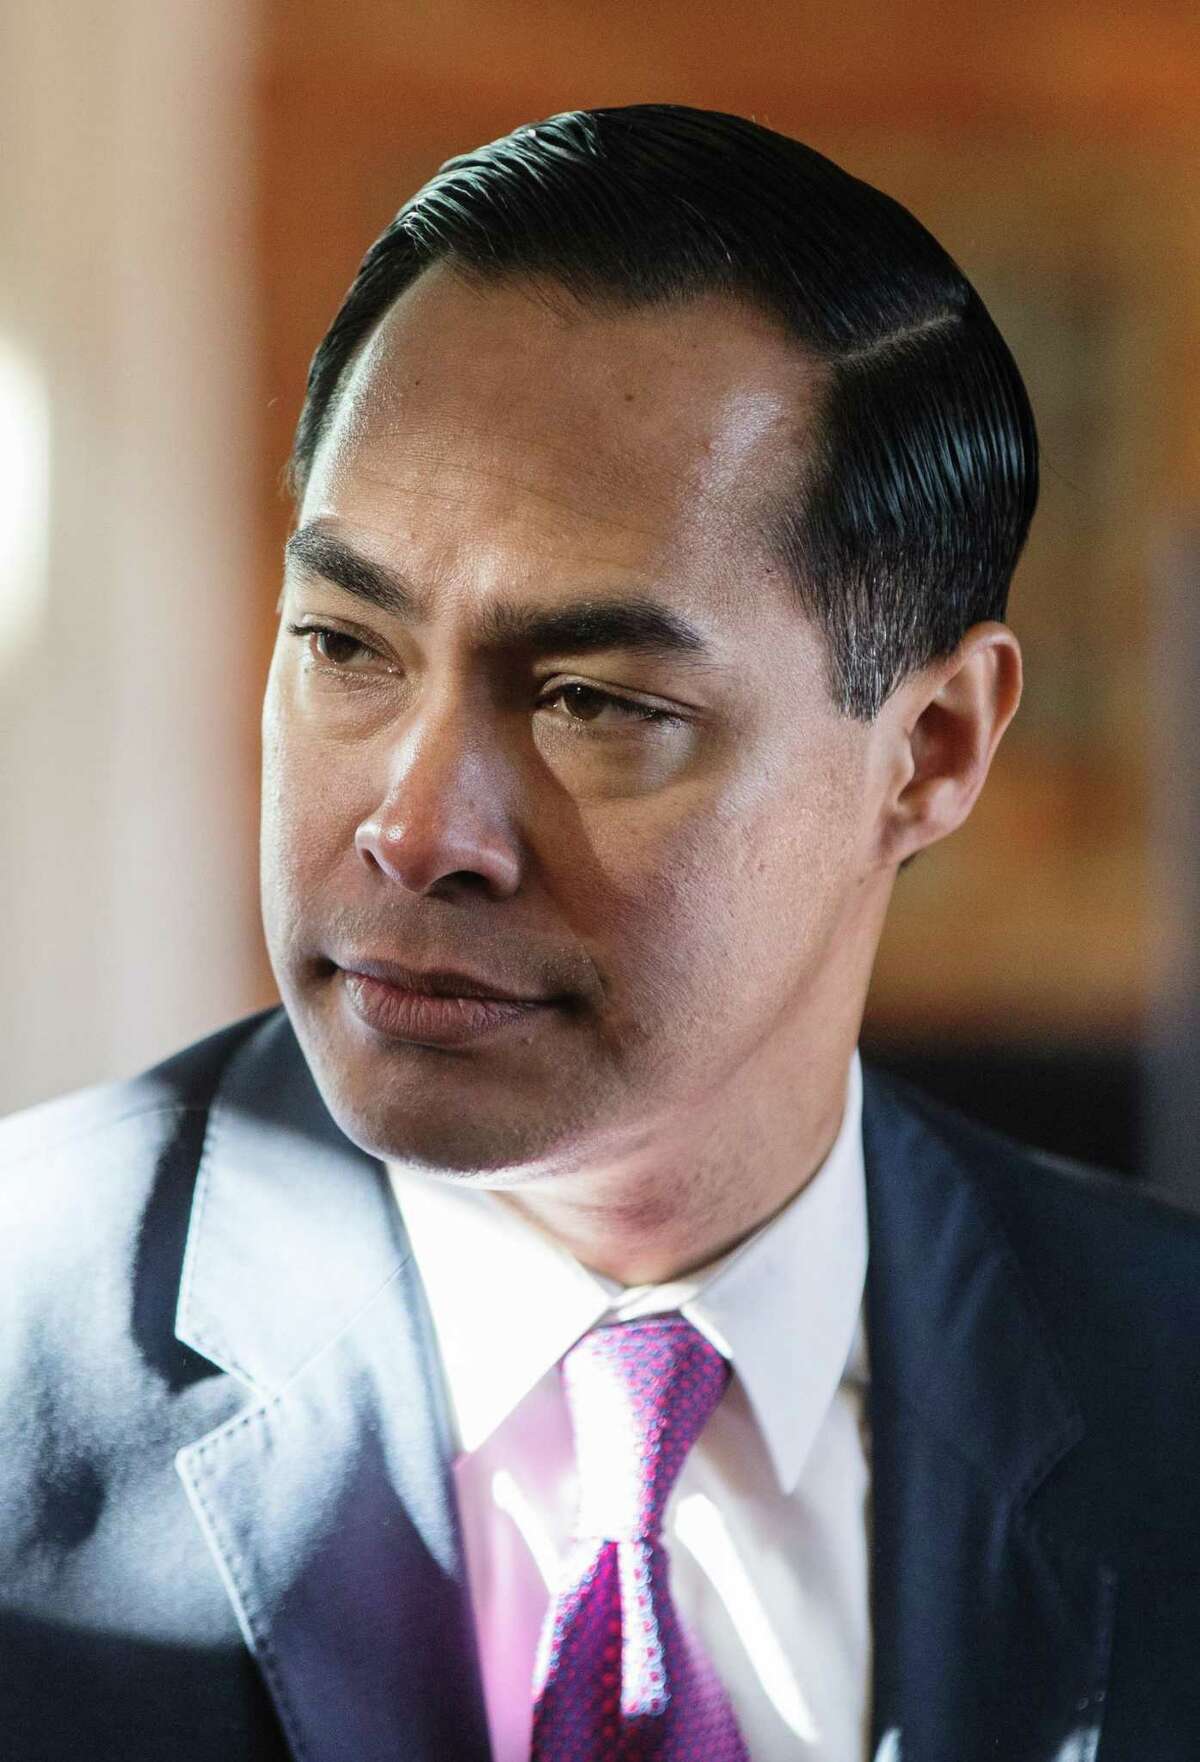 Julian Castro, former secretary of Housing and Urban Development (HUD), listens as a volunteer speaks at the "Navigating Recovery of the Lakes Region" organization in Laconia, New Hampshire, U.S., on Wednesday, Jan. 16, 2019. With the potential for the biggest field of Democratic candidates in a generation looking to challenge President Donald Trump in 2020, some would-be campaign staffers are playing hard to get with less prominent candidates trying to get an early jump in Iowa and other early nominating states. Photographer: Scott Eisen/Bloomberg